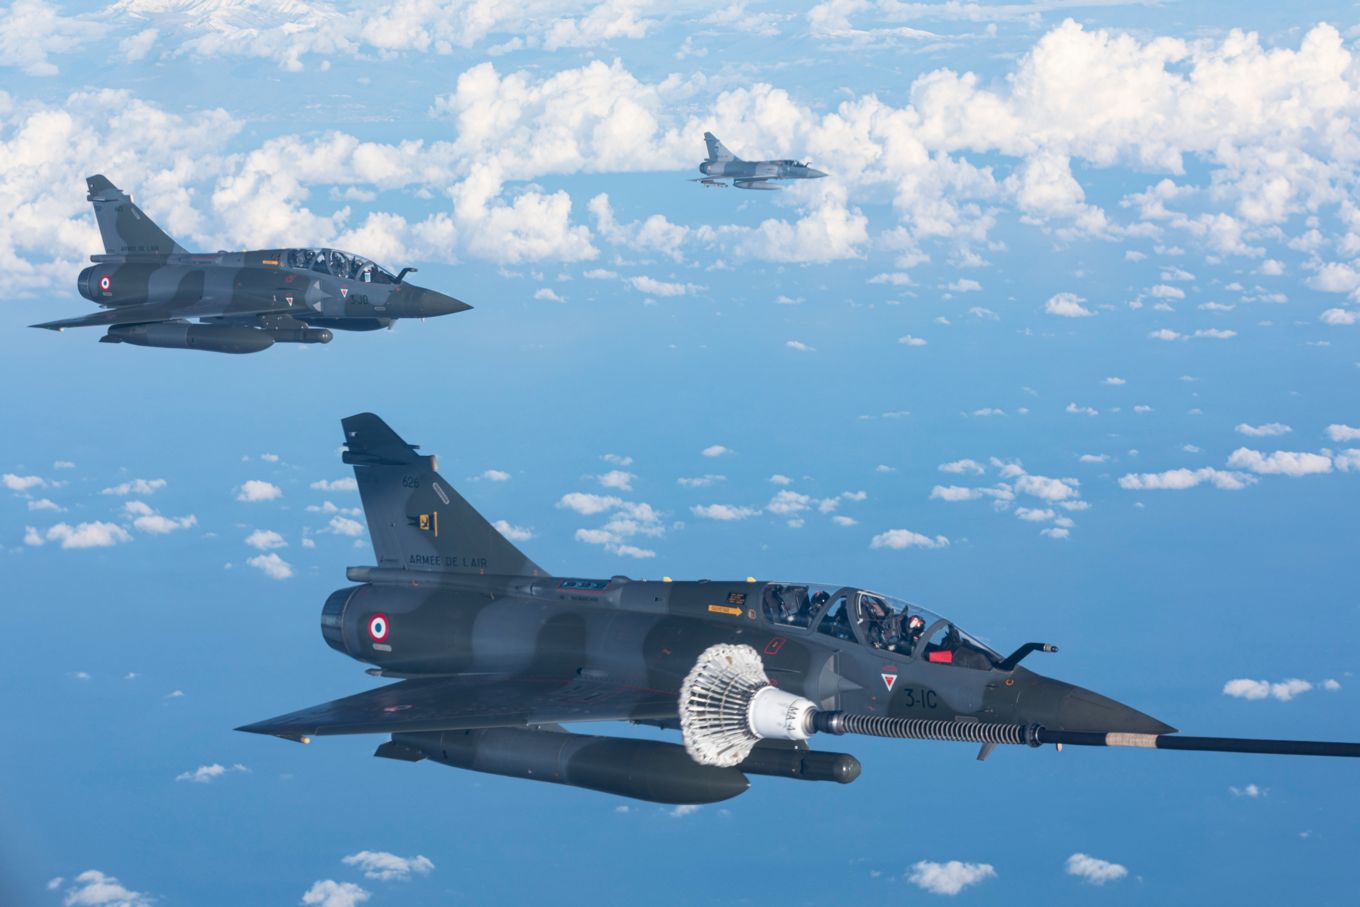 Pictured, Armee de l’air Mirage 2000 fighters